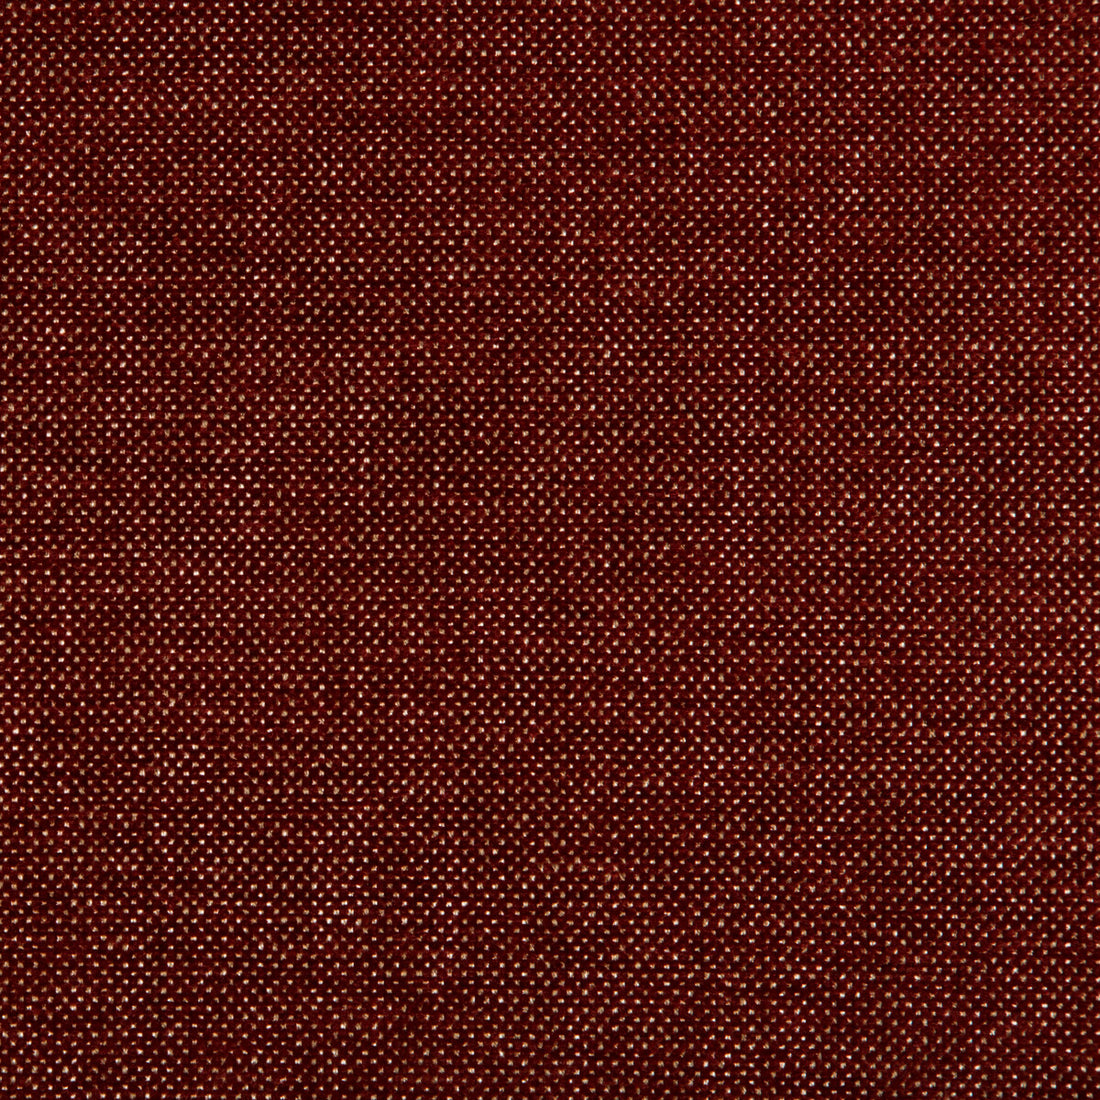 Kravet Smart fabric in 35393-9 color - pattern 35393.9.0 - by Kravet Smart in the Performance Crypton Home collection